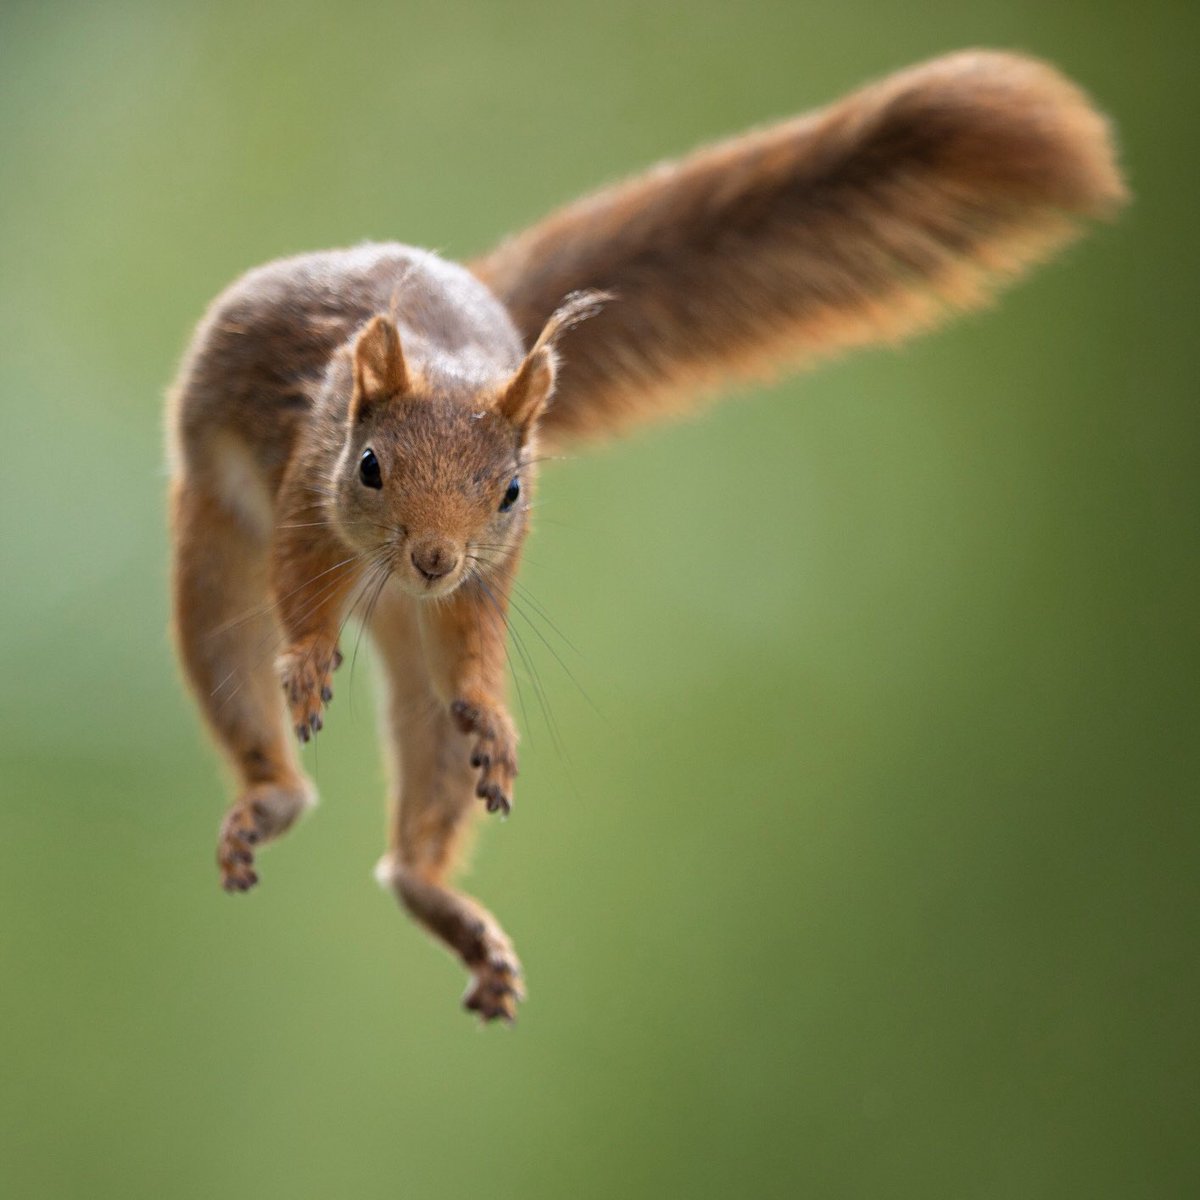 Not only do I photograph baby squirrels, but I also photograph adults jumping 